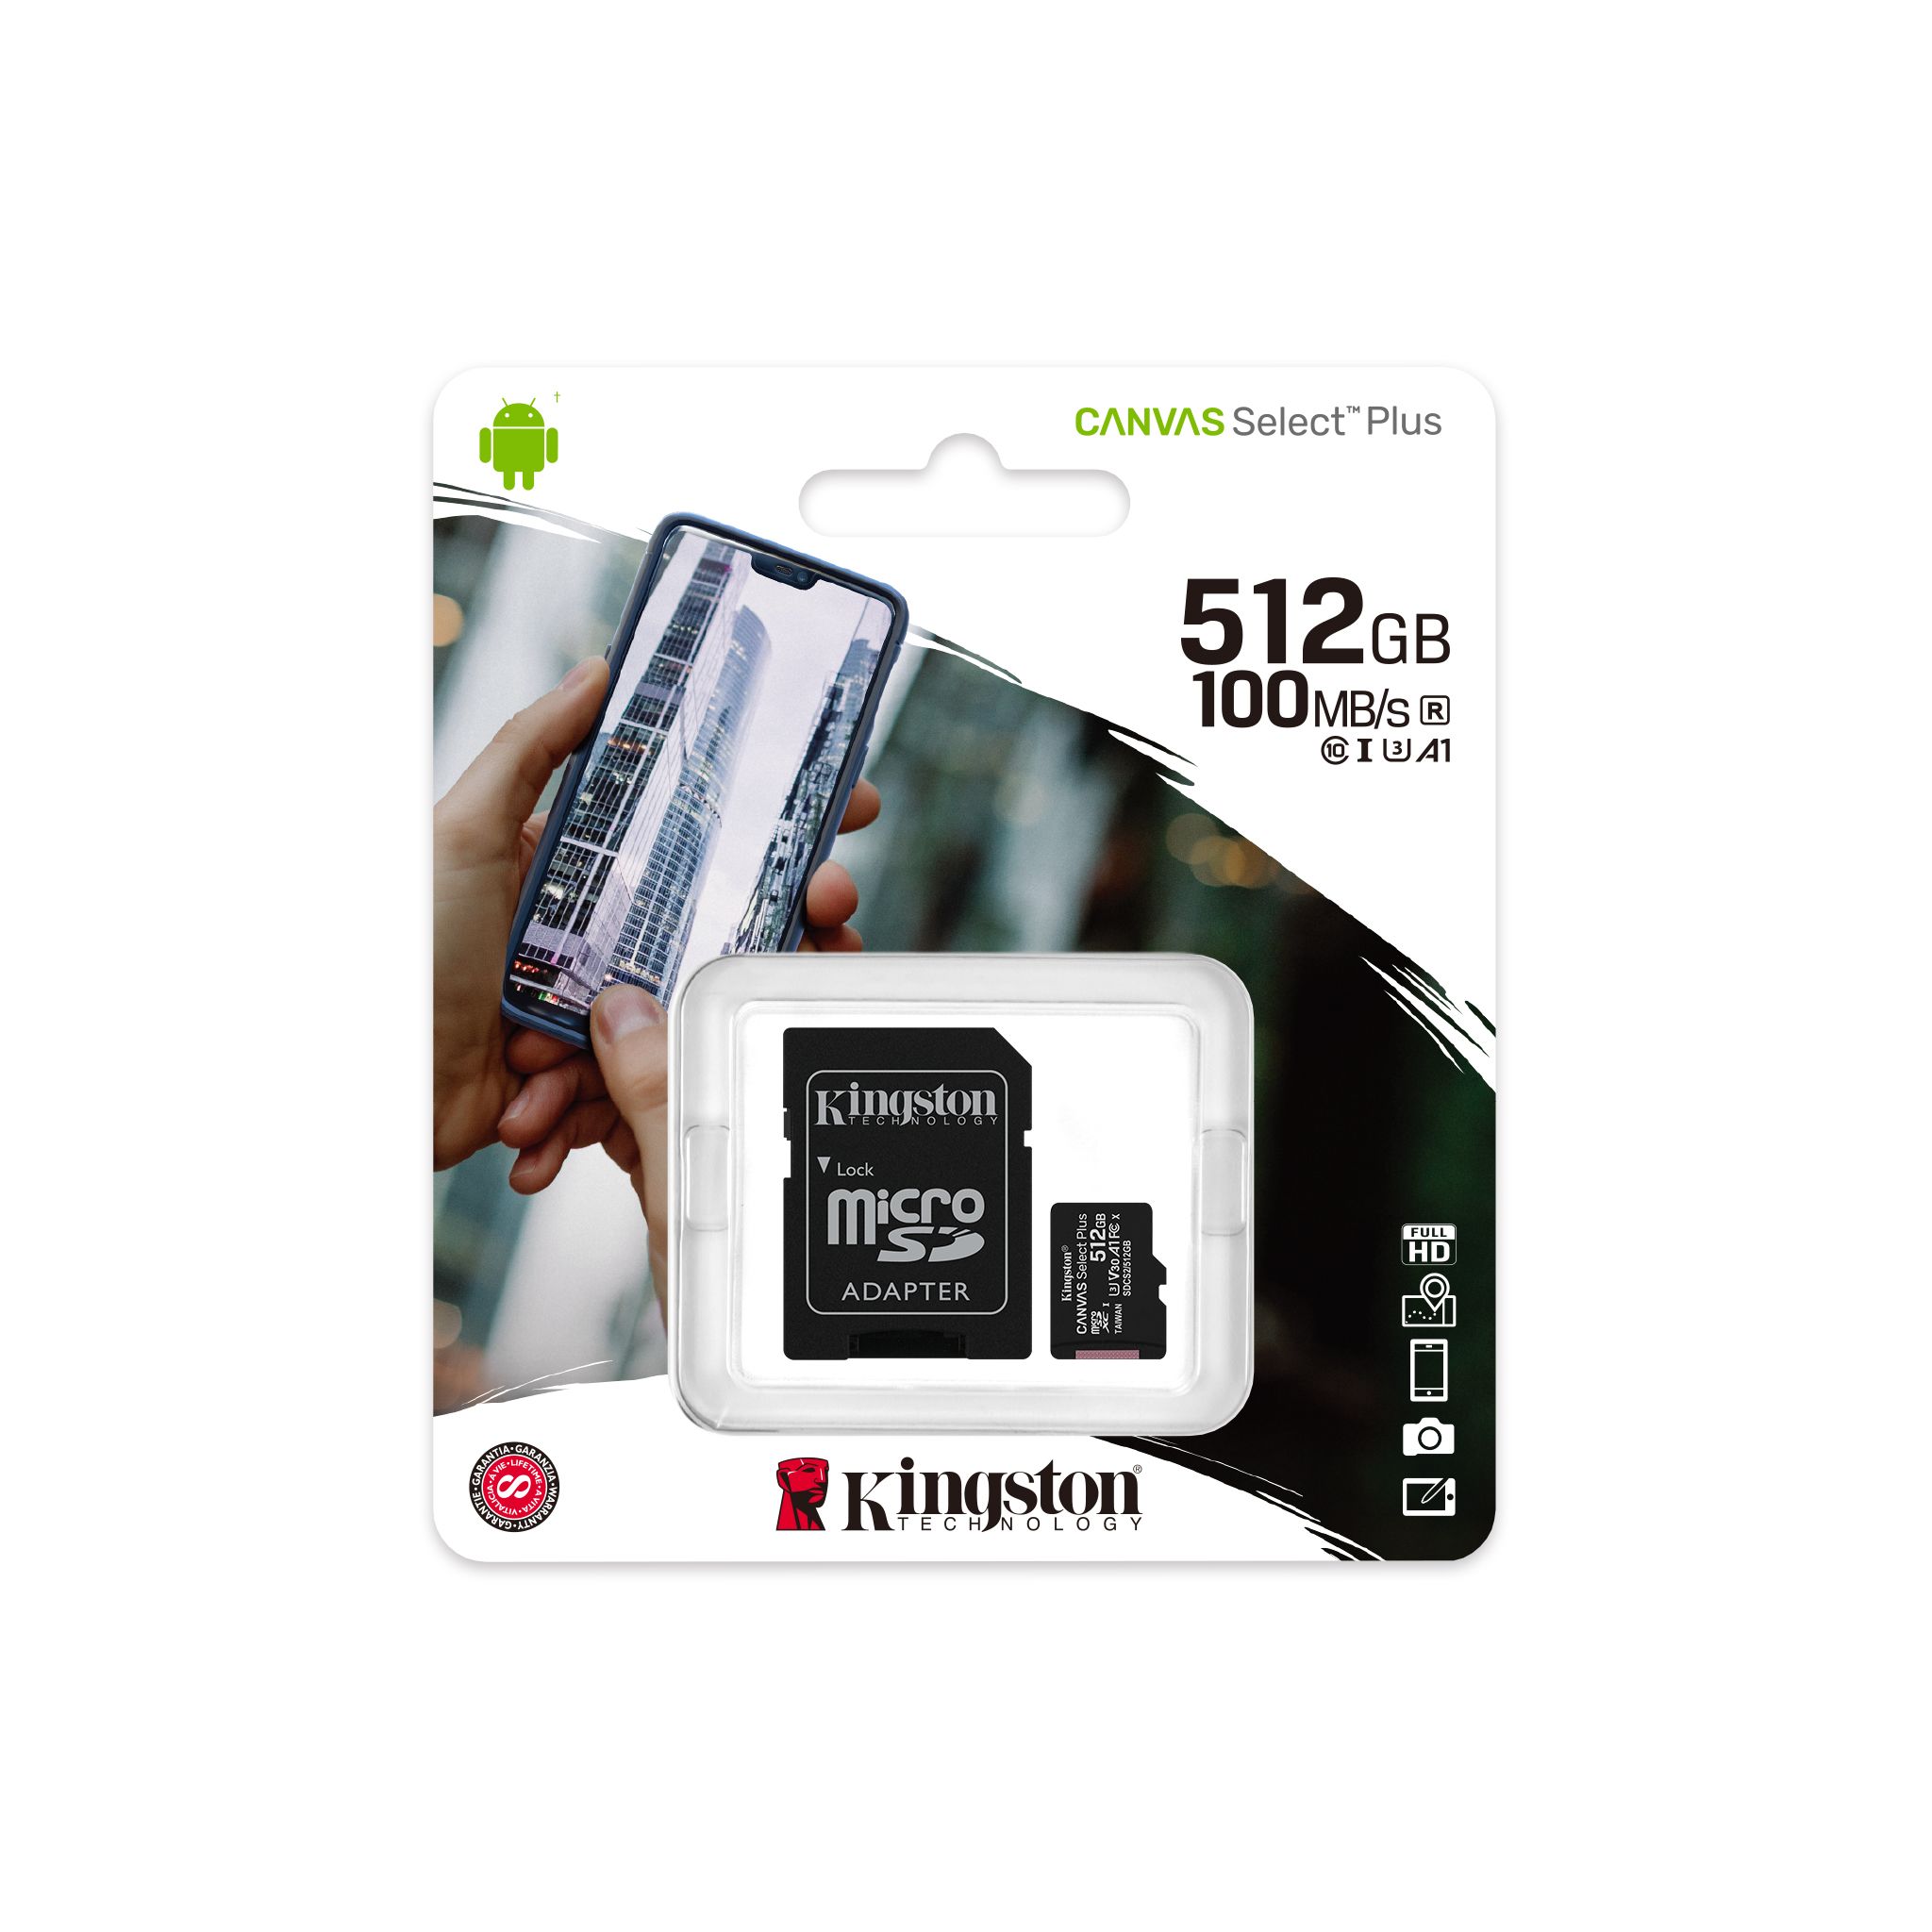 100MBs Works with Kingston Kingston 512GB Zen Mobile Ultrafone 303 Quad MicroSDXC Canvas Select Plus Card Verified by SanFlash. 